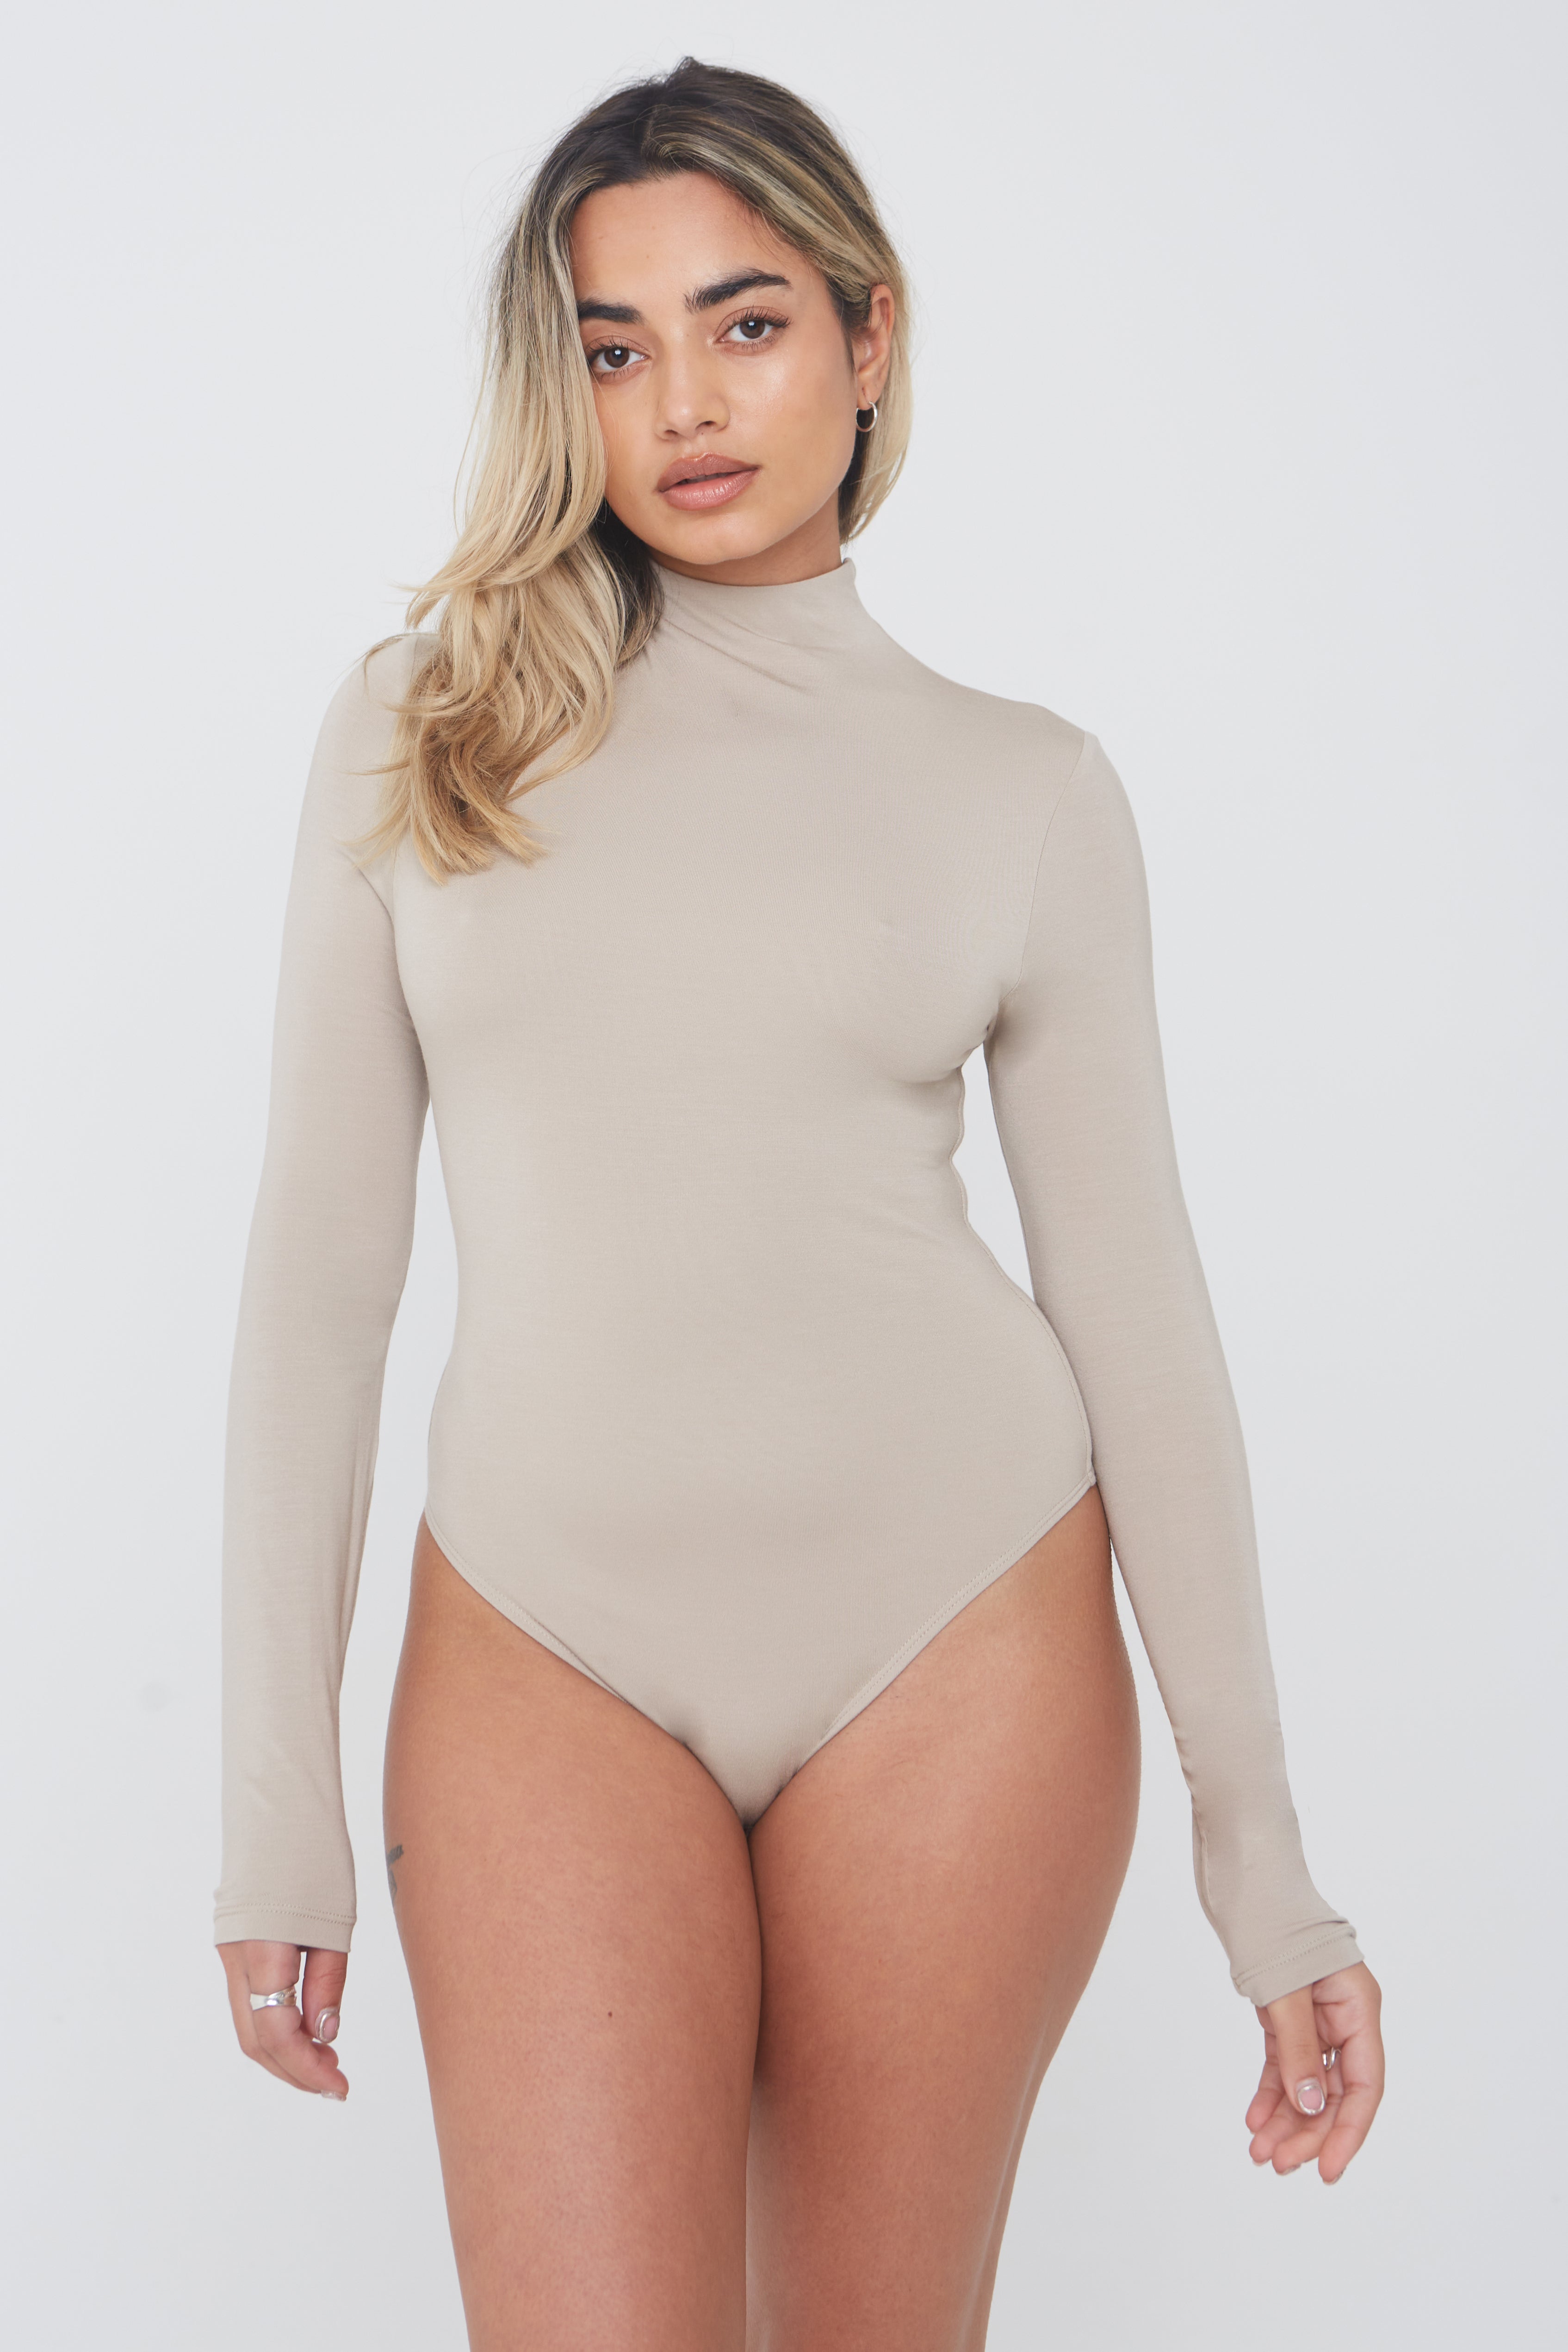 Green Bodysuits, Everyday Low Prices